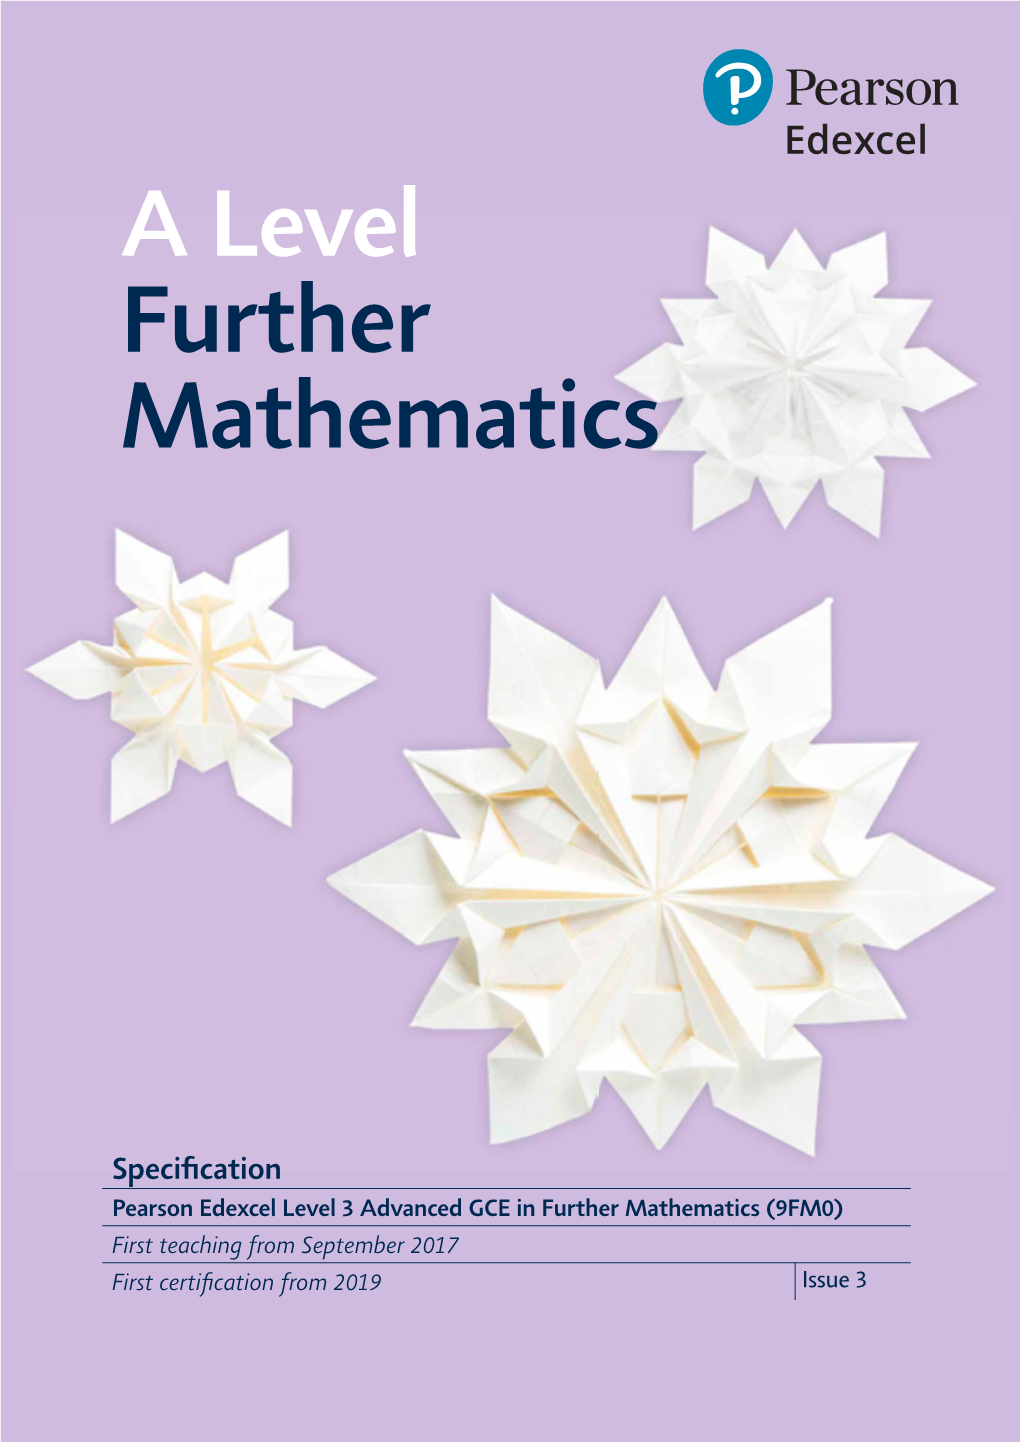 A Level Further Mathematics Specification